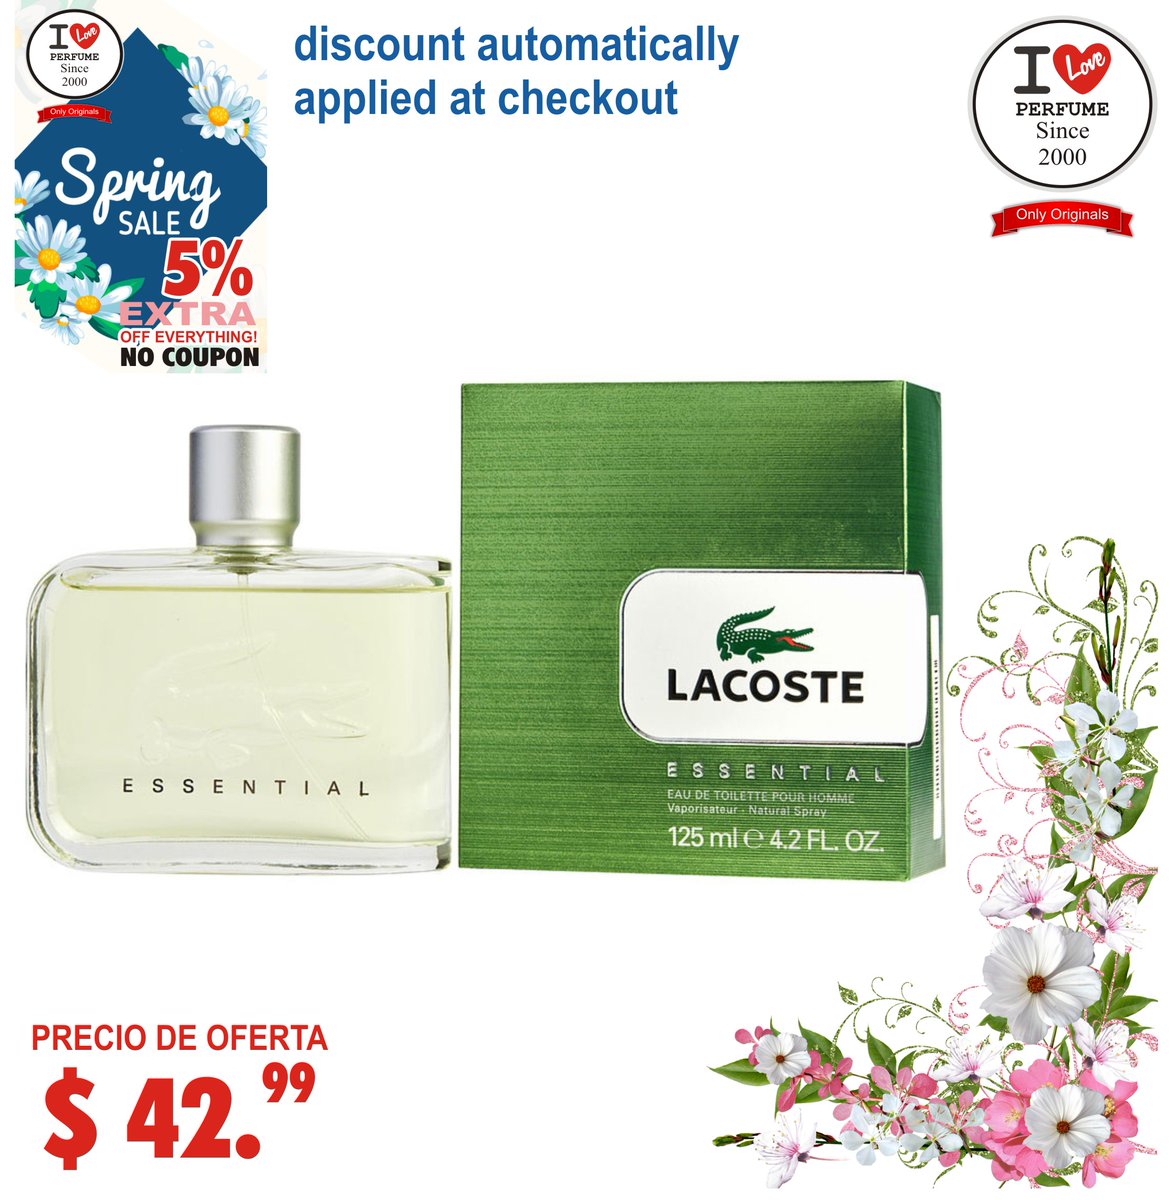 #LacosteEssential
by Lacoste Men Eau De Toilette 4.2 oz

#SPRING SALE in #ILovePerfume #OFFERSNOCOUPONS
Visit our business website and buy your favorite perfume.
iloveperfume.us
#ManyNews #NoveltiesInPerfumes #Sale
#BigOffers #Novelties #SPRINGSALE